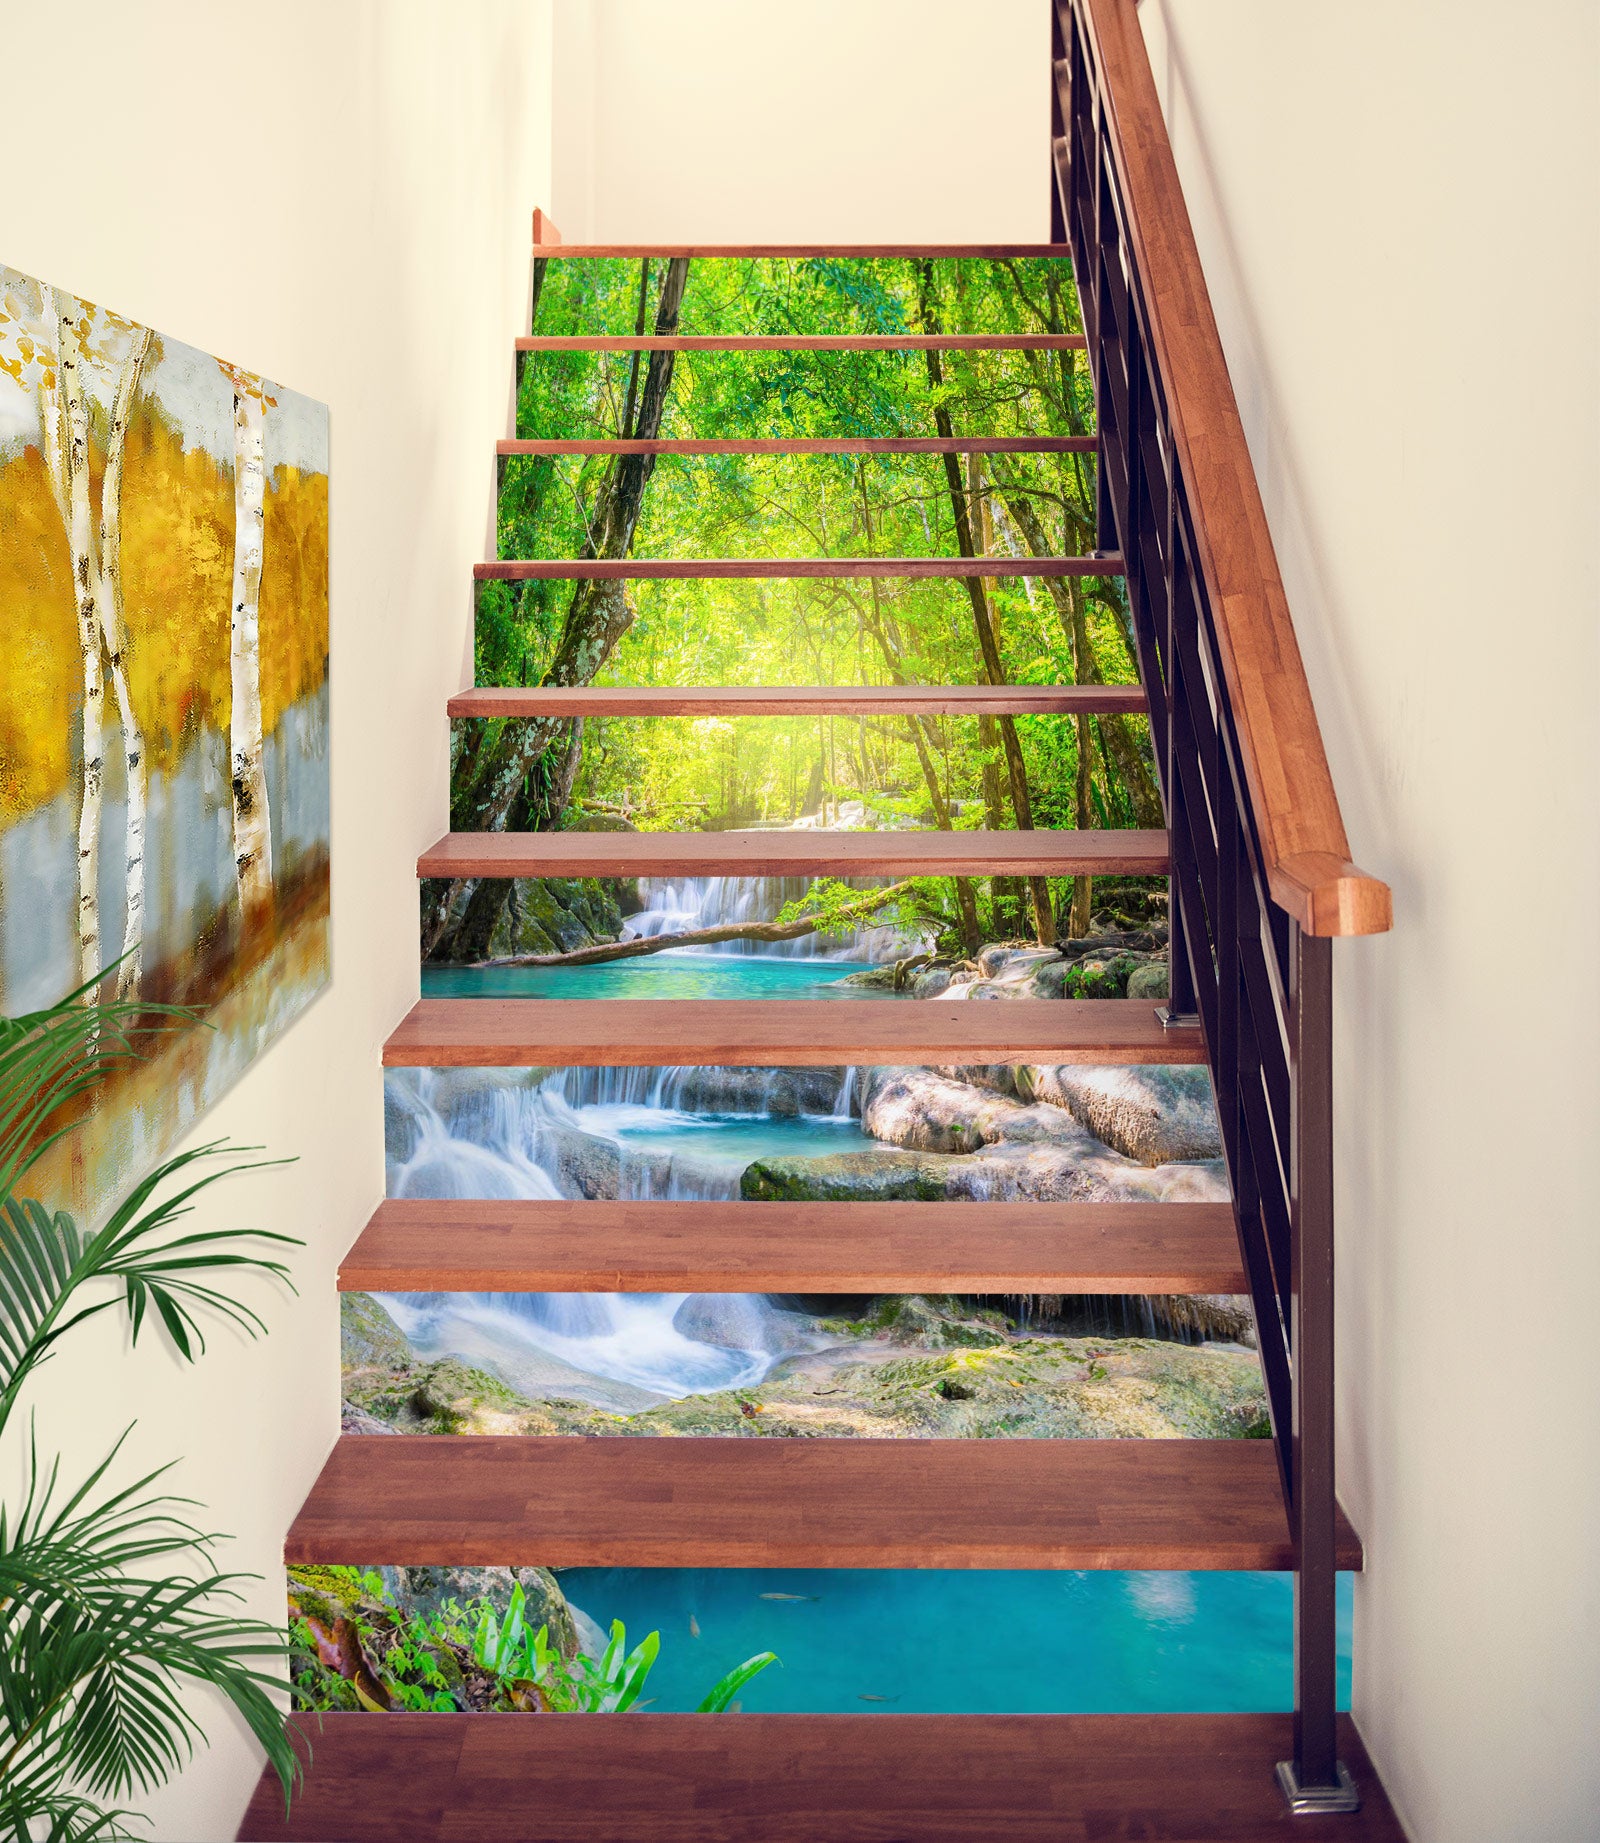 3D Cool Summer Scenery 348 Stair Risers